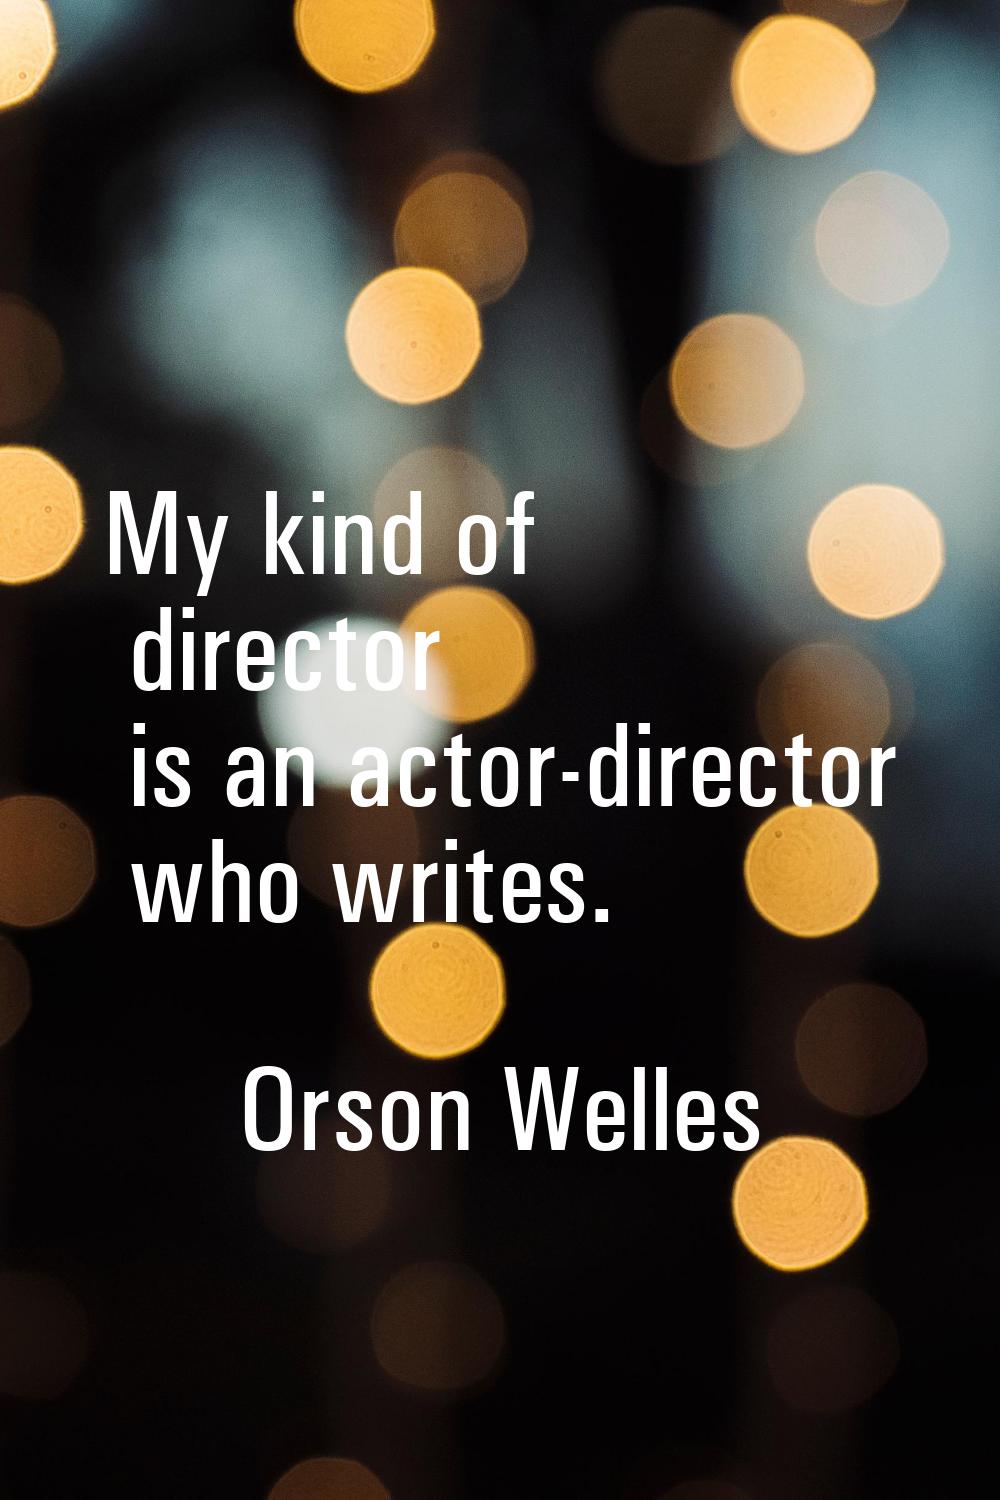 My kind of director is an actor-director who writes.